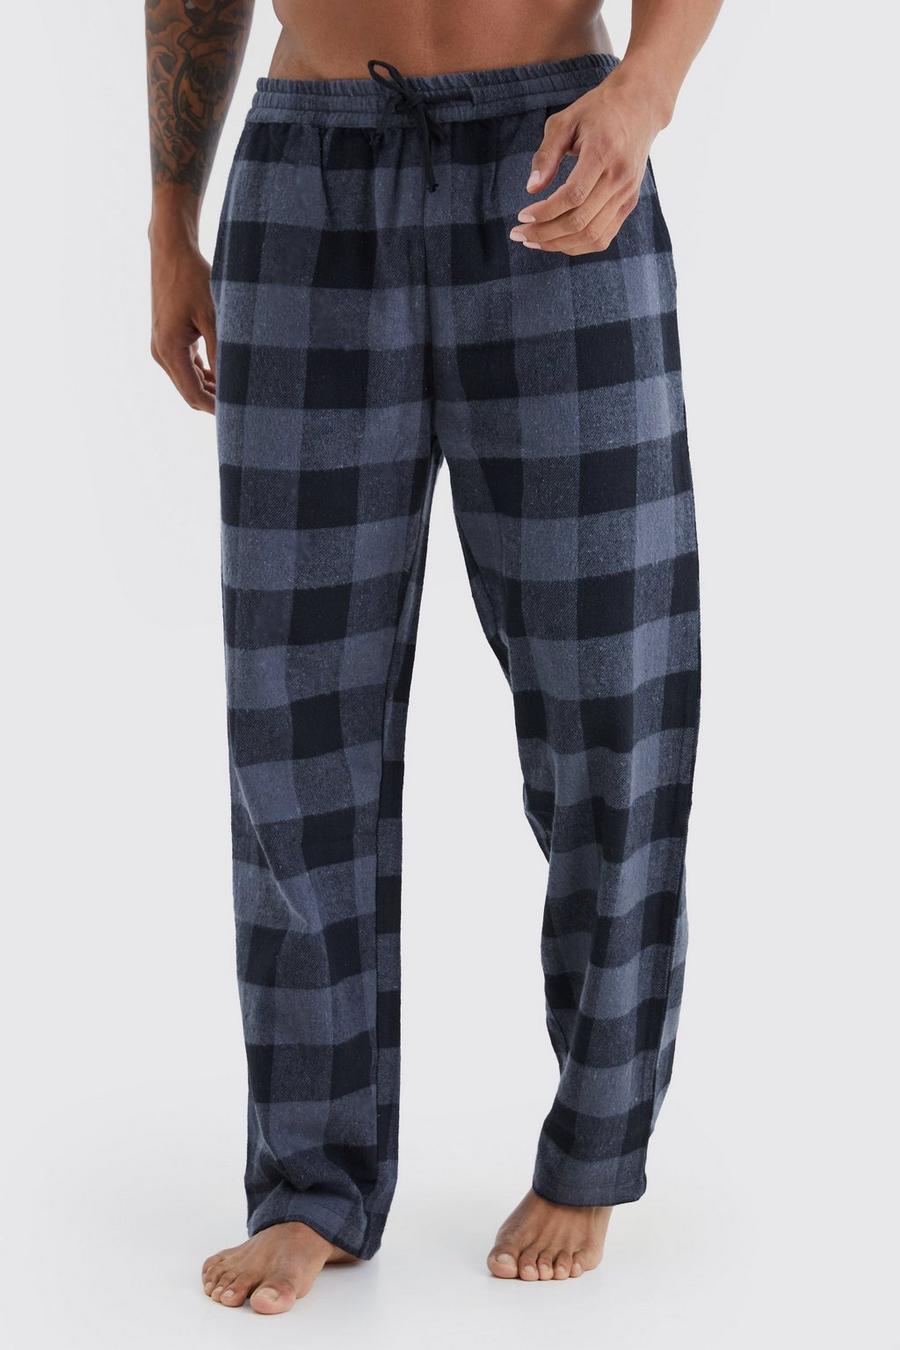 Black Woven Check Loungewear Pants image number 1